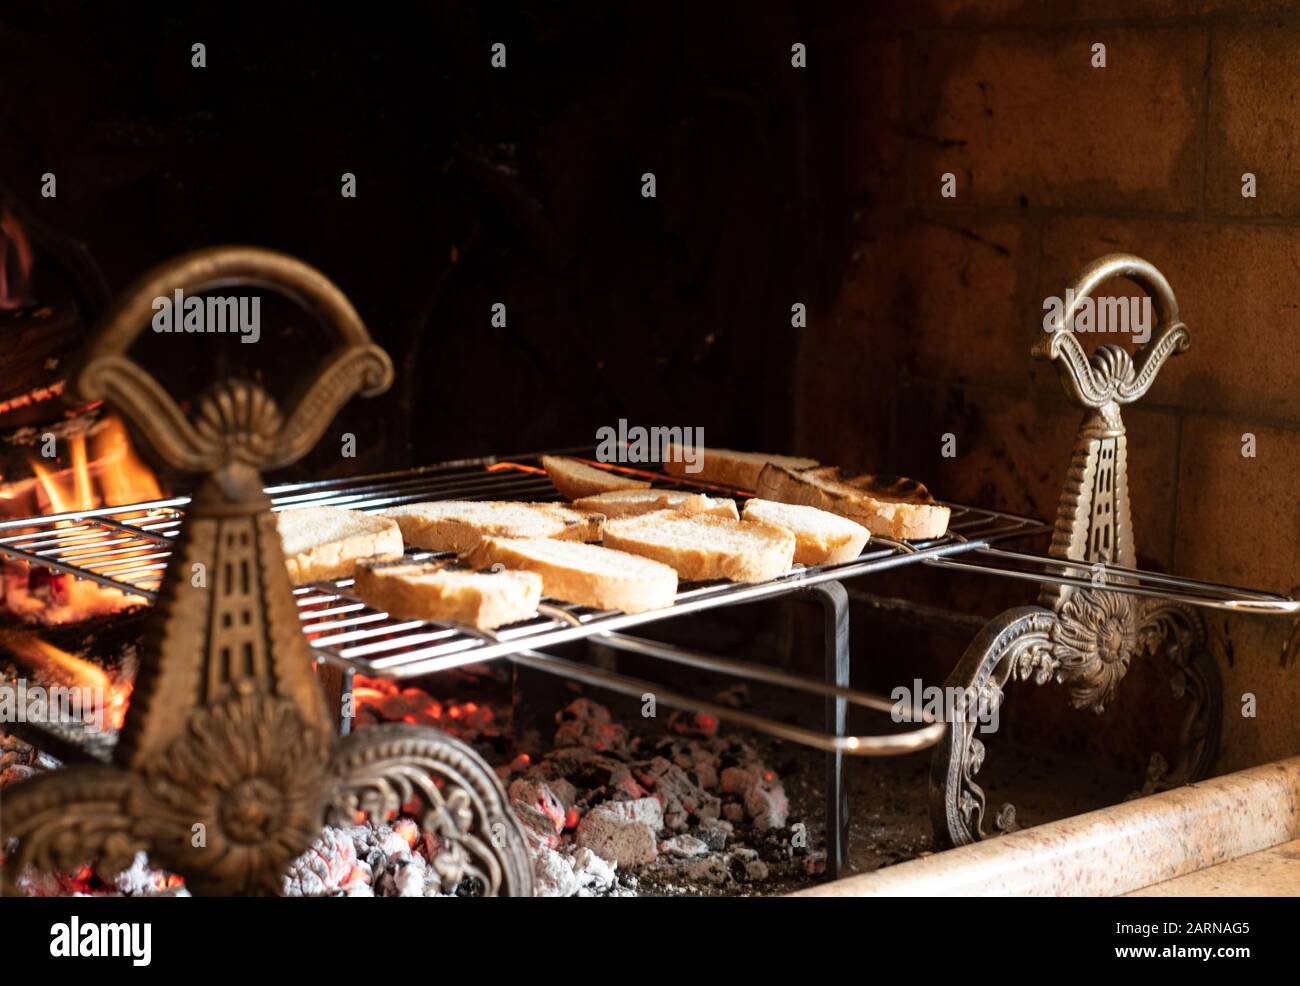 Assorted sliced bread toasting on a metal rack over hot coals and fire with flames in a fireplace indoors with copy space above Stock Photo